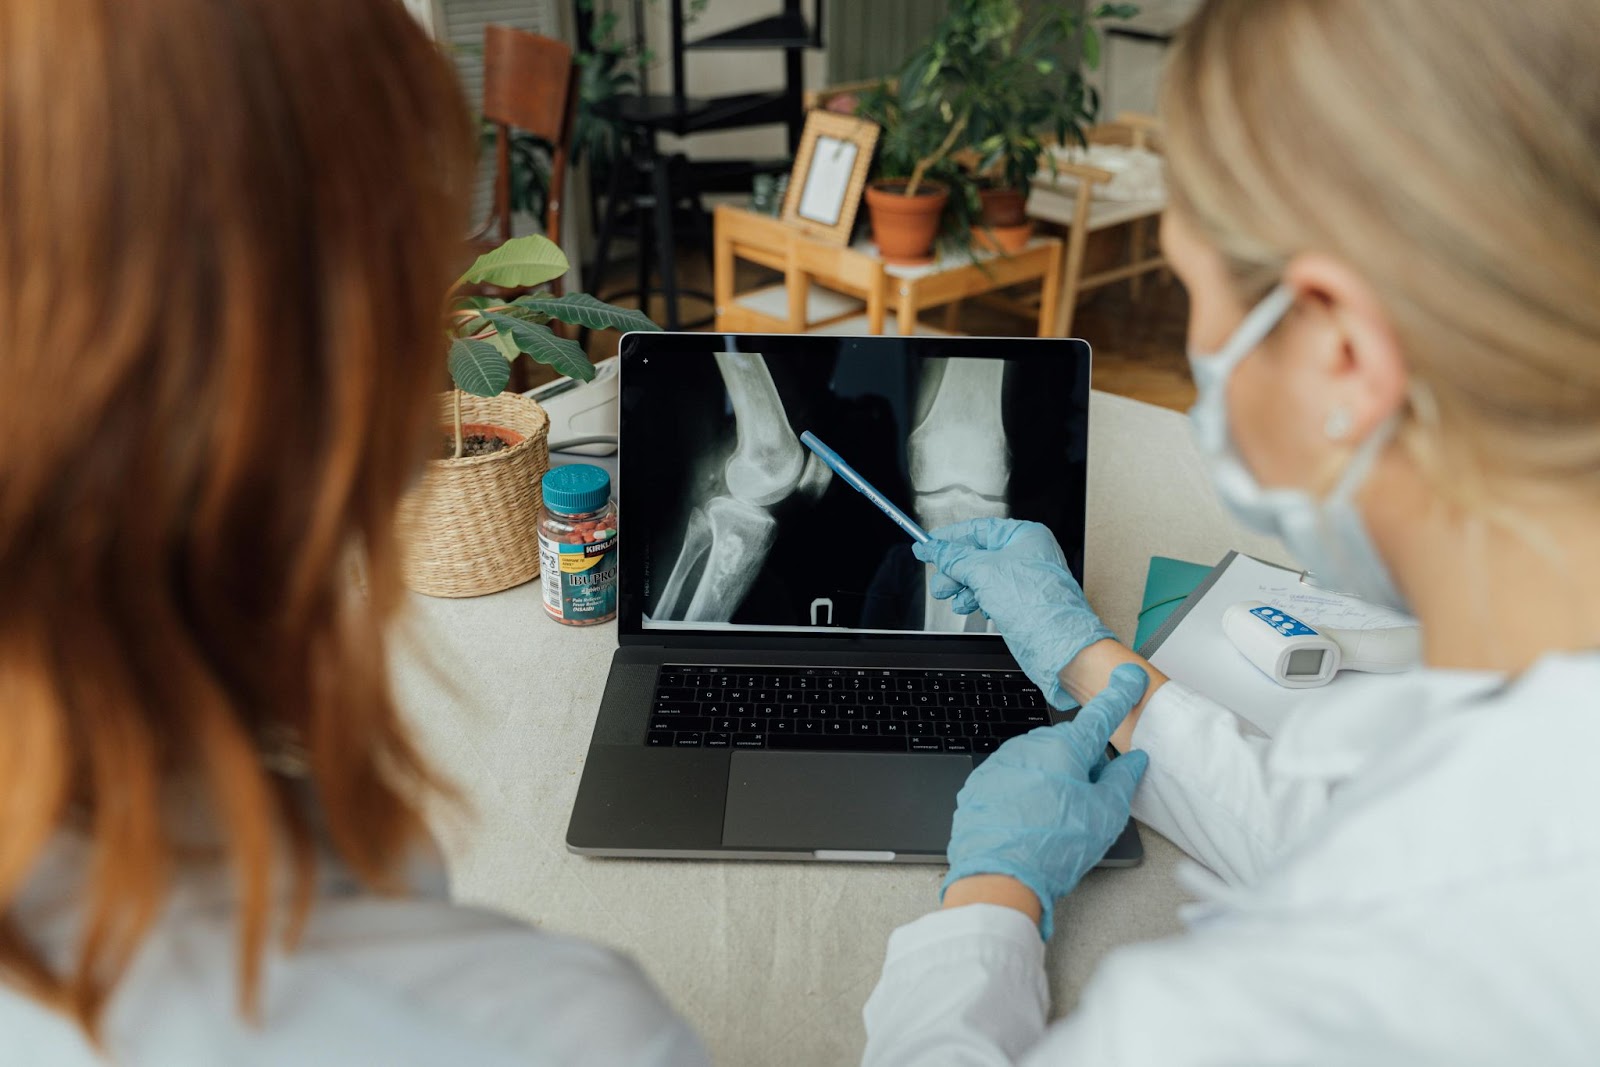 spotcovery-doctors-examining-an-x-ray-image-on-a-laptop-national-walking-day